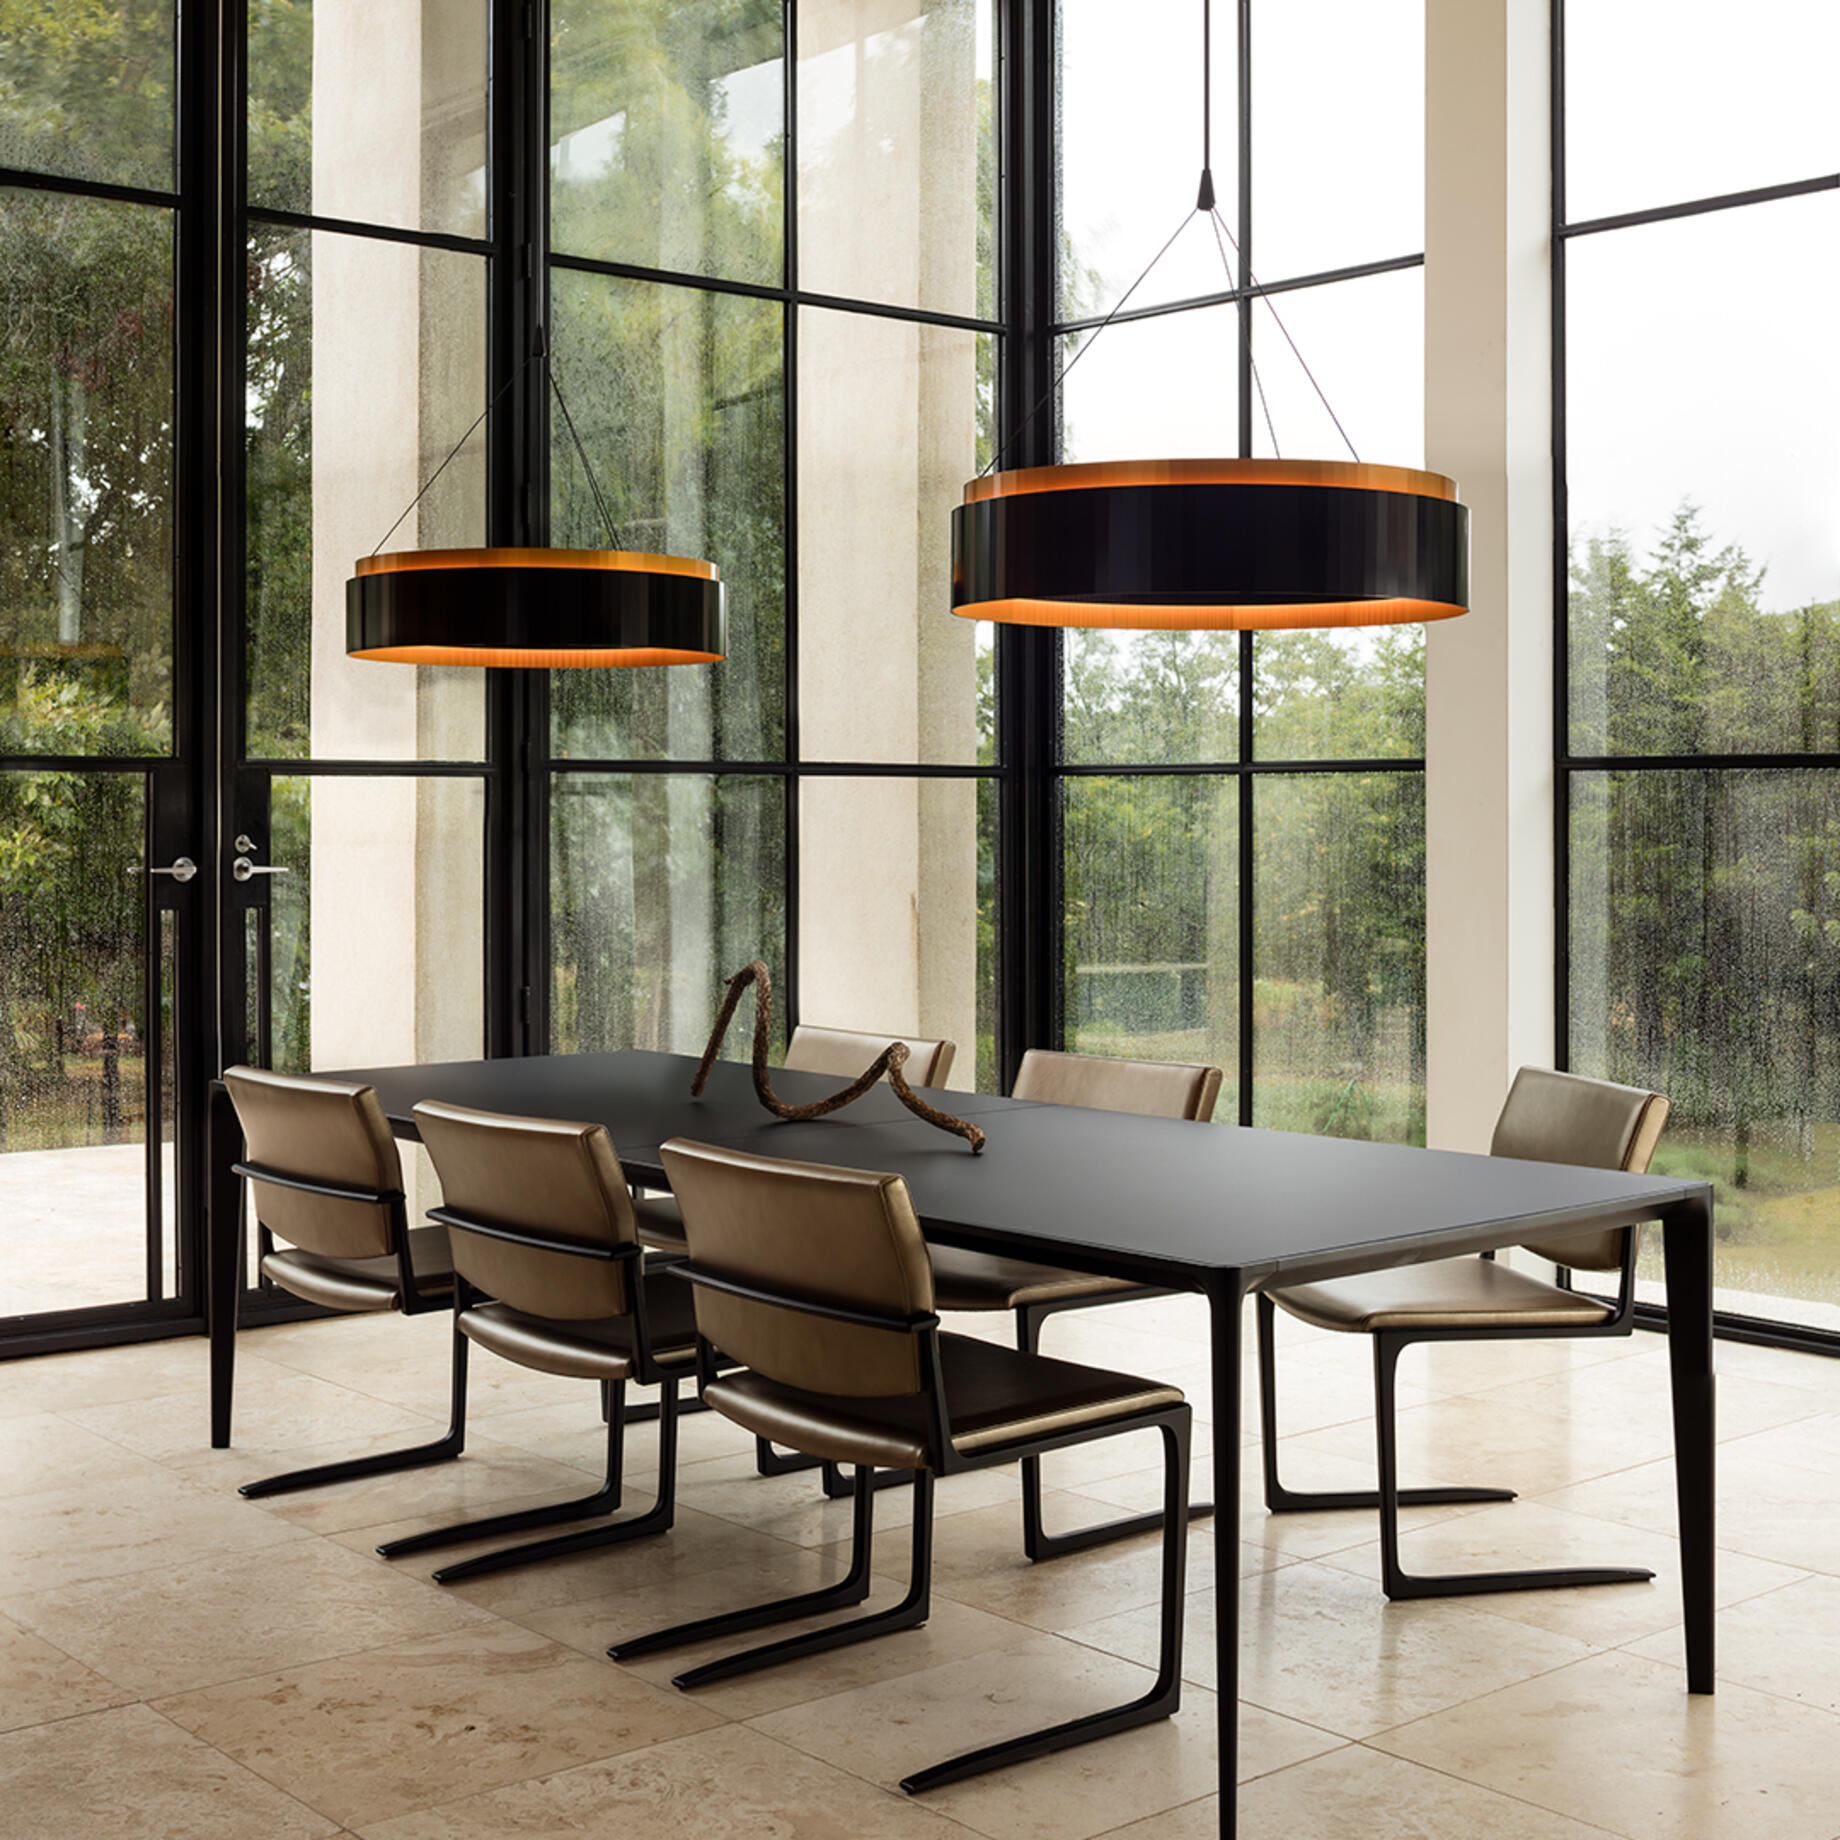 HOLLY HUNT Studio Shadow Dining Table and Chairs